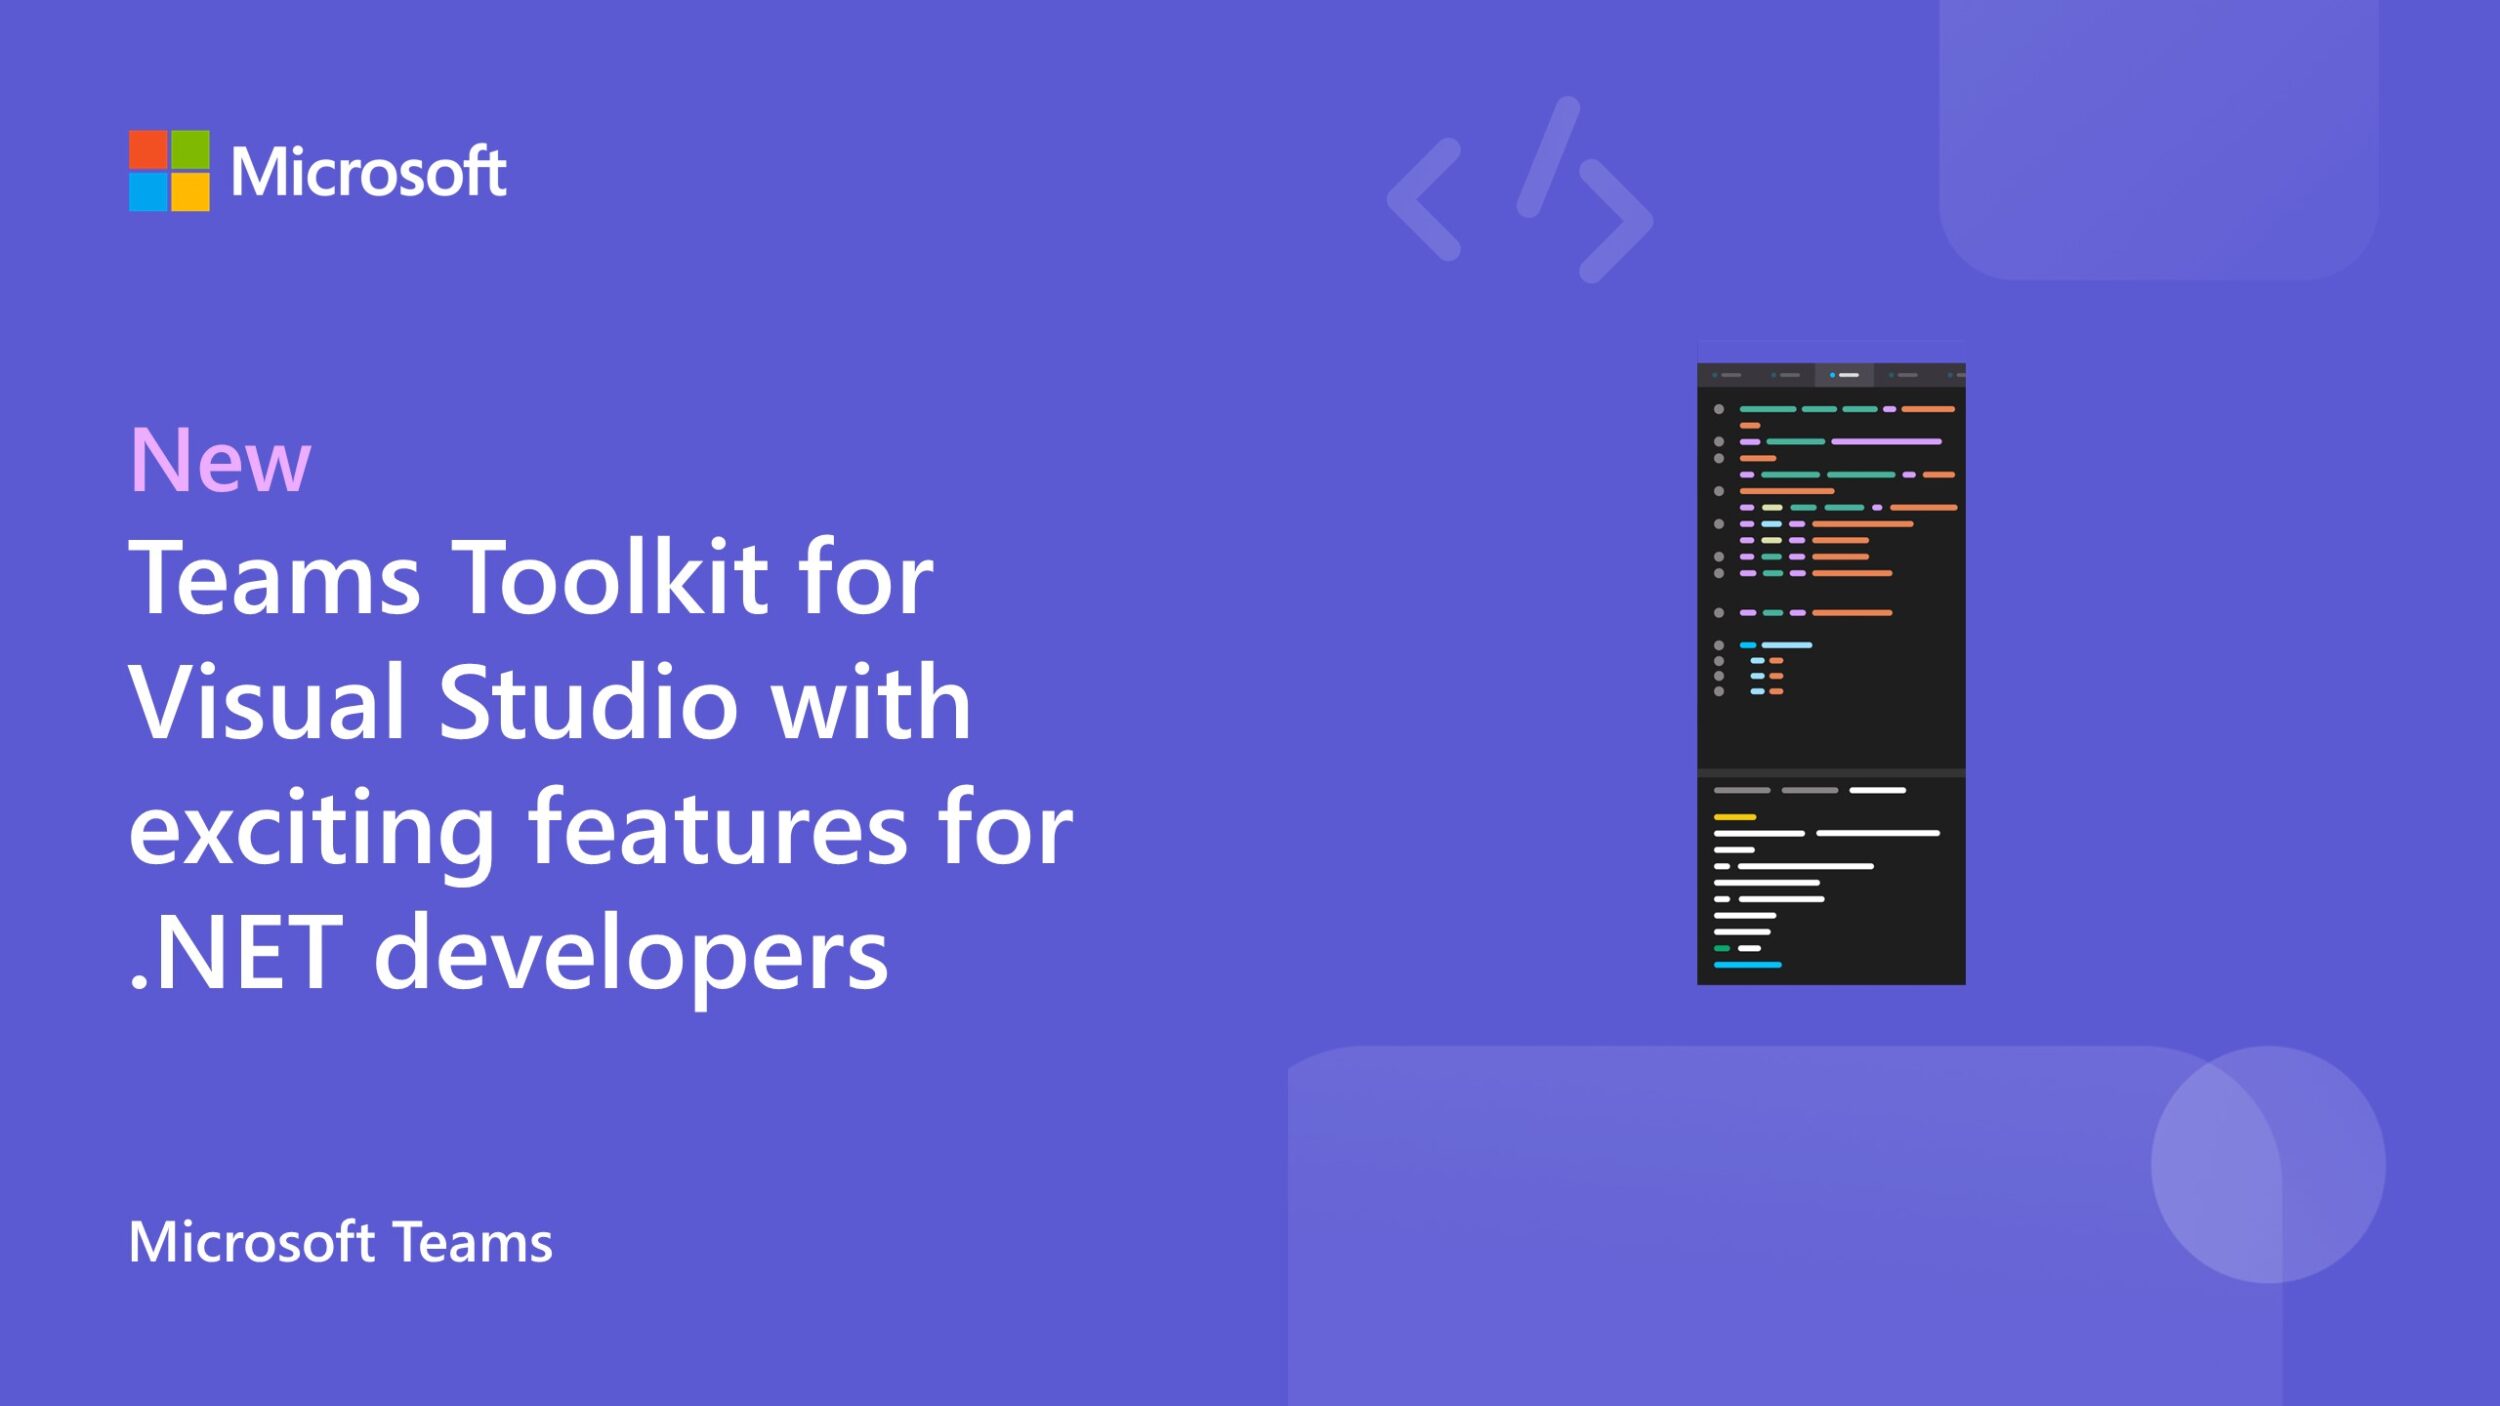 New Teams Toolkit for Visual Studio release with exciting features for .NET developers